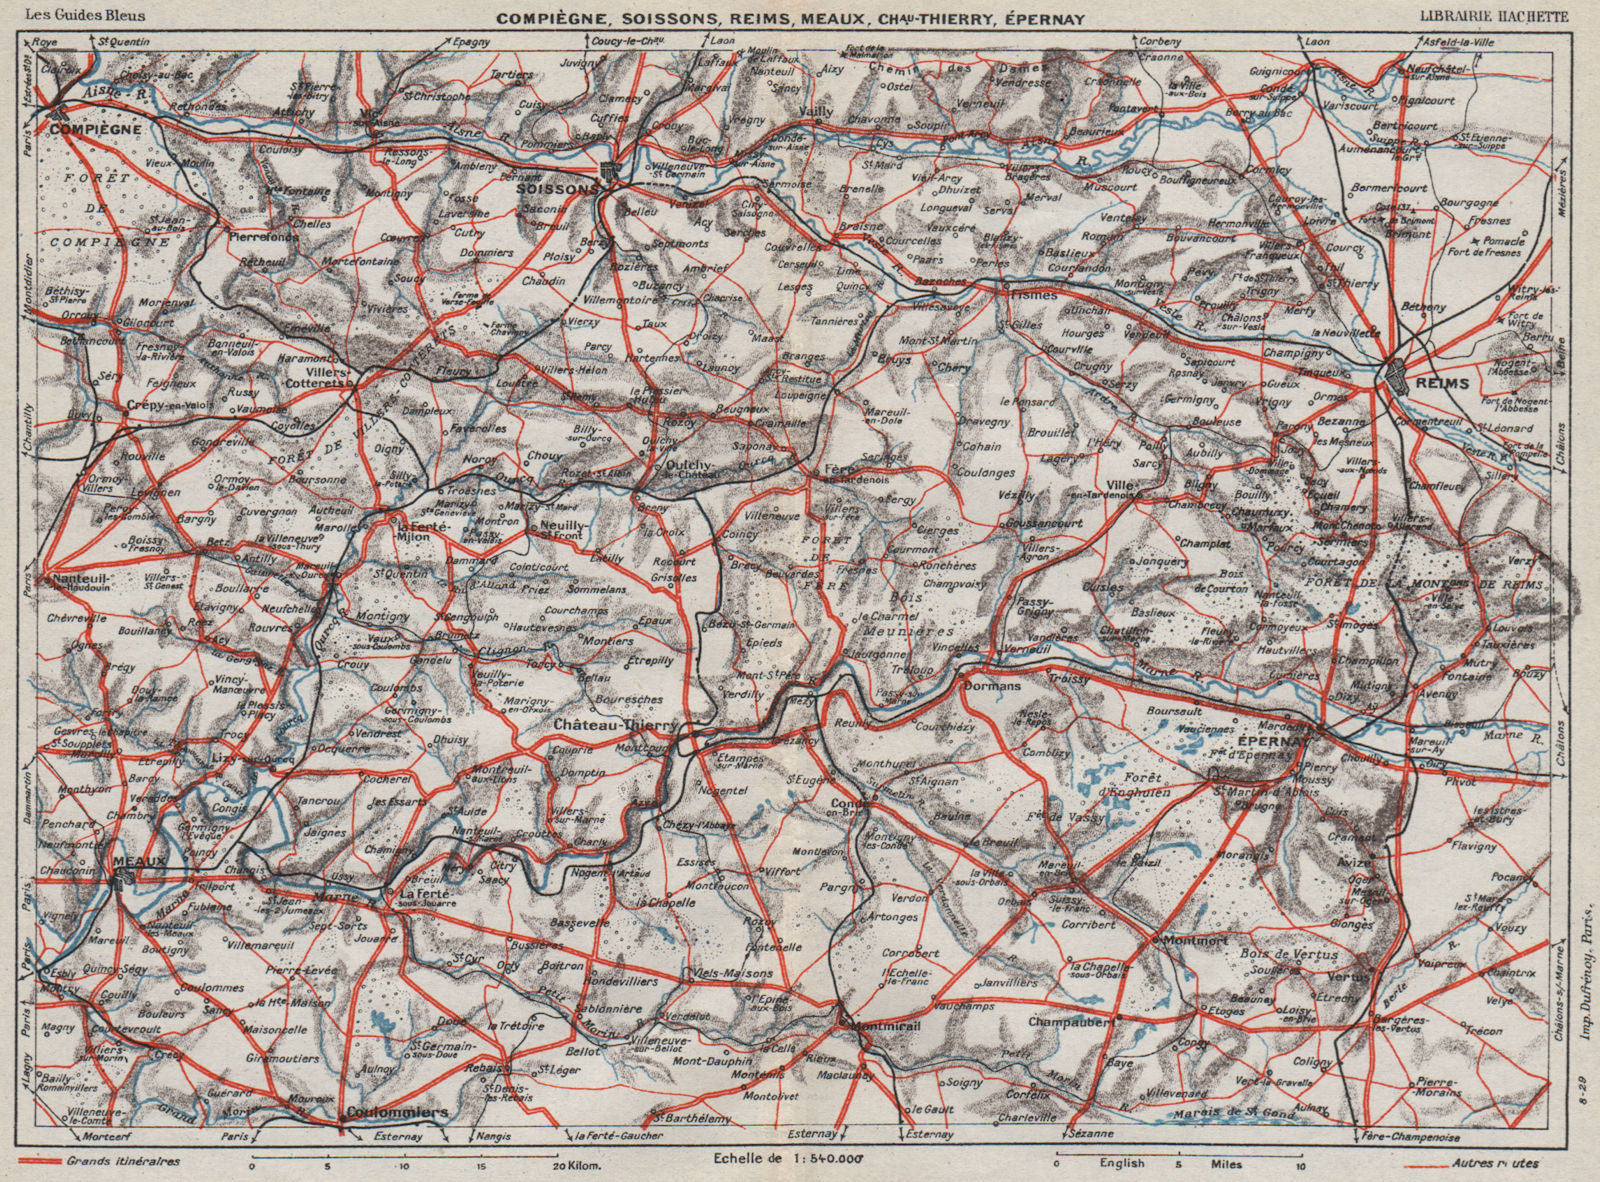 Associate Product AISNE & MARNE VALLEYS. Reims Meaux Soissons Épernay Champagne Oise 1930 map